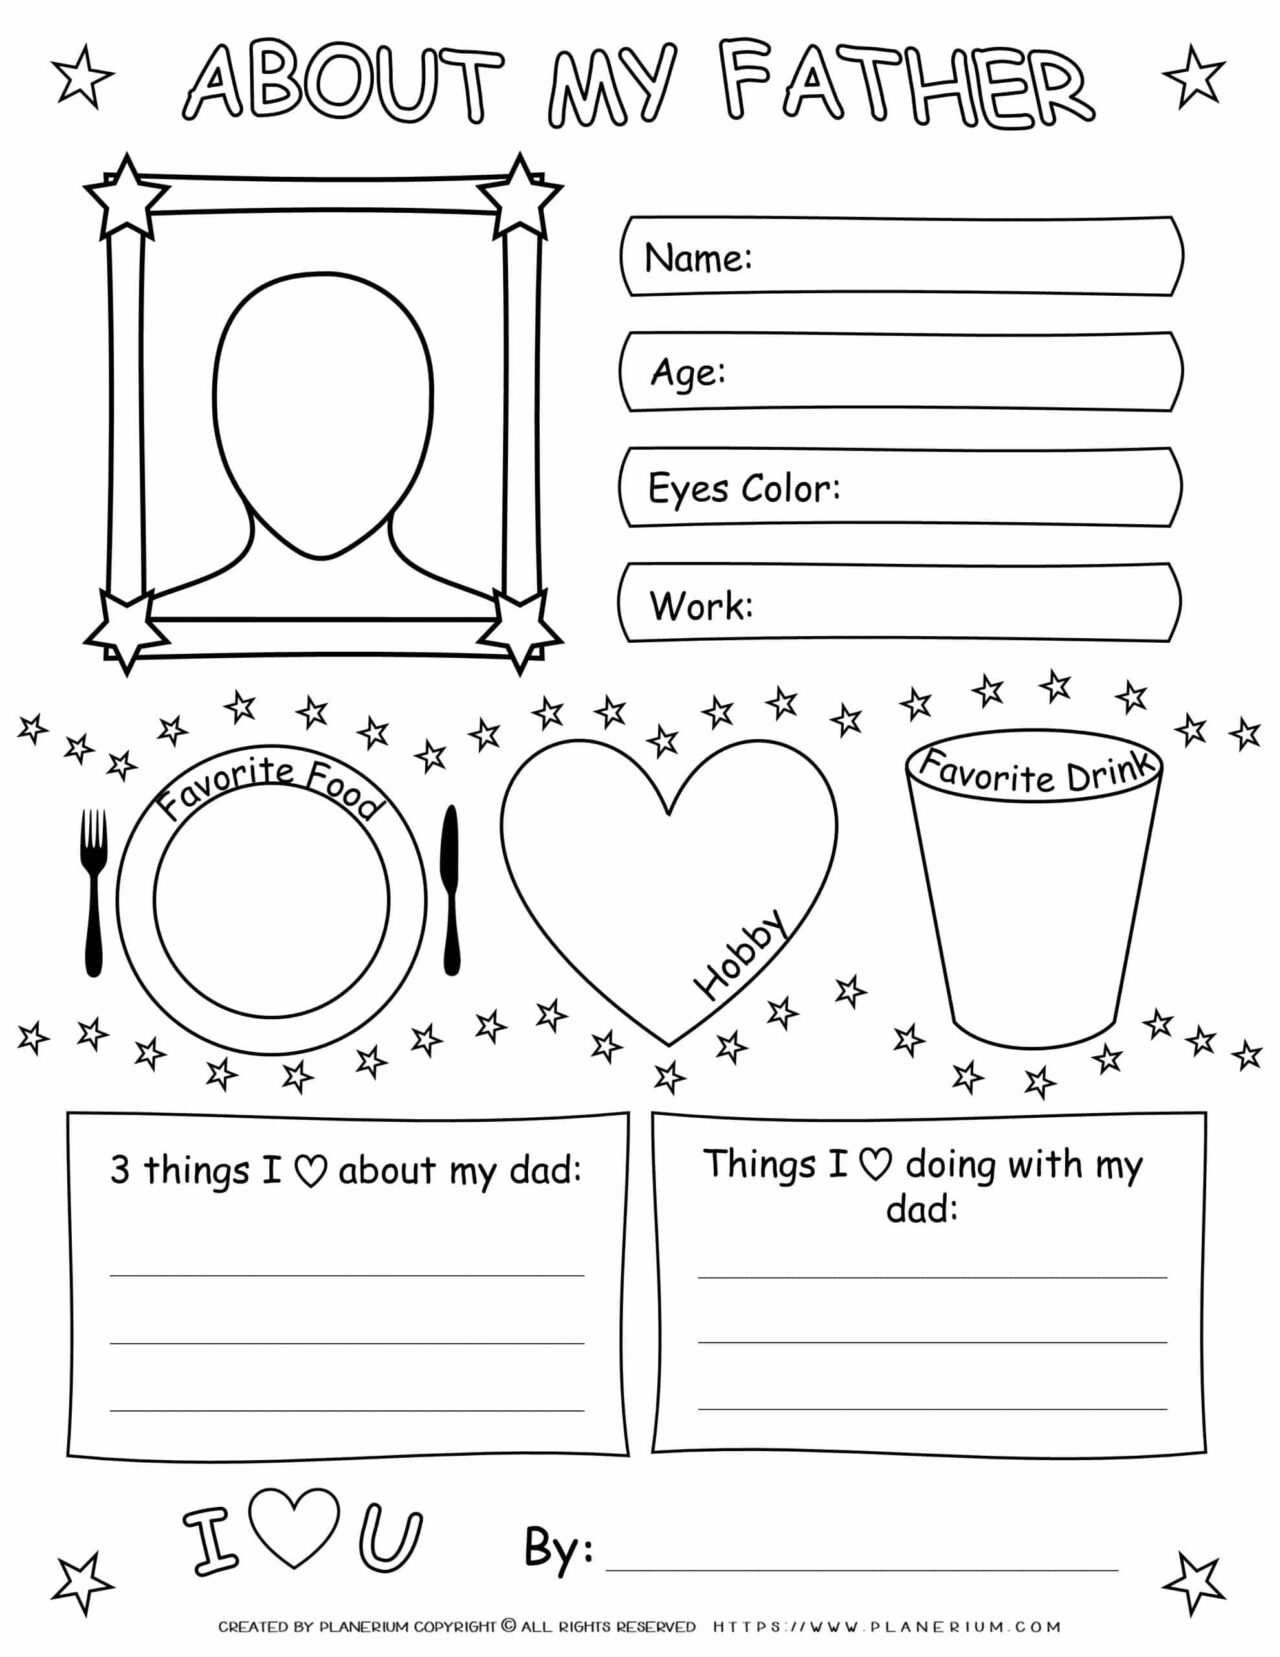 Father's Day - Worksheet - About My Dad